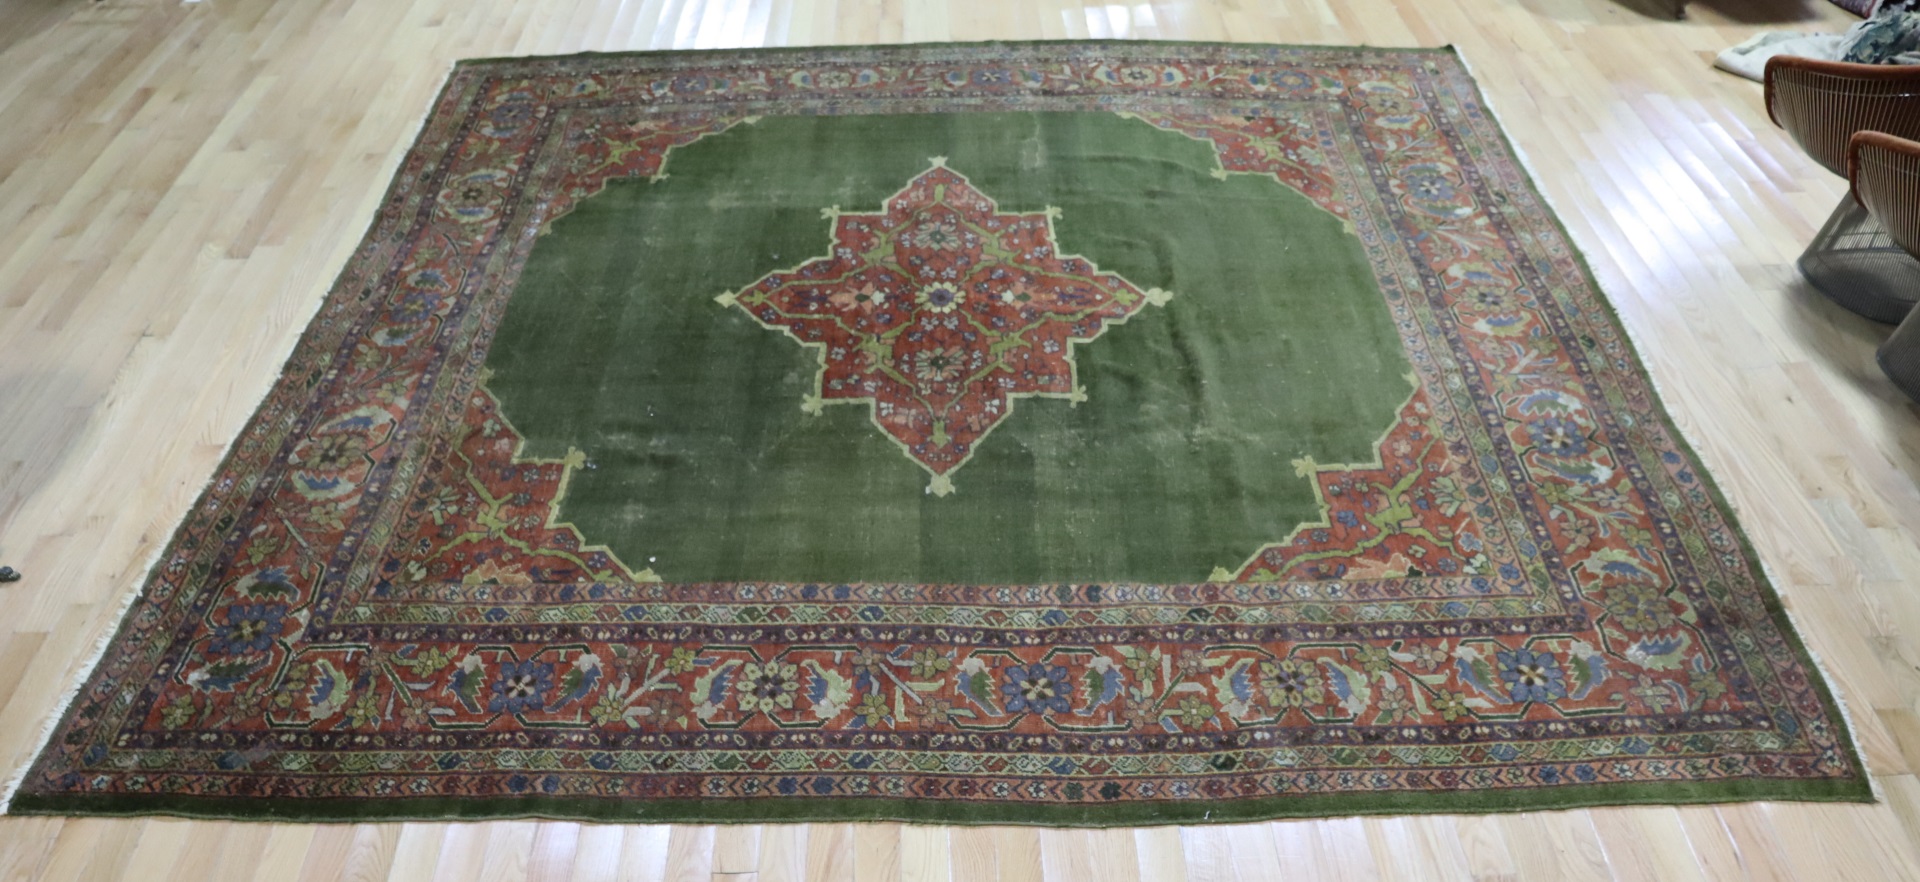 ANTIQUE AND FINELY HAND WOVEN CARPET  3bd75e